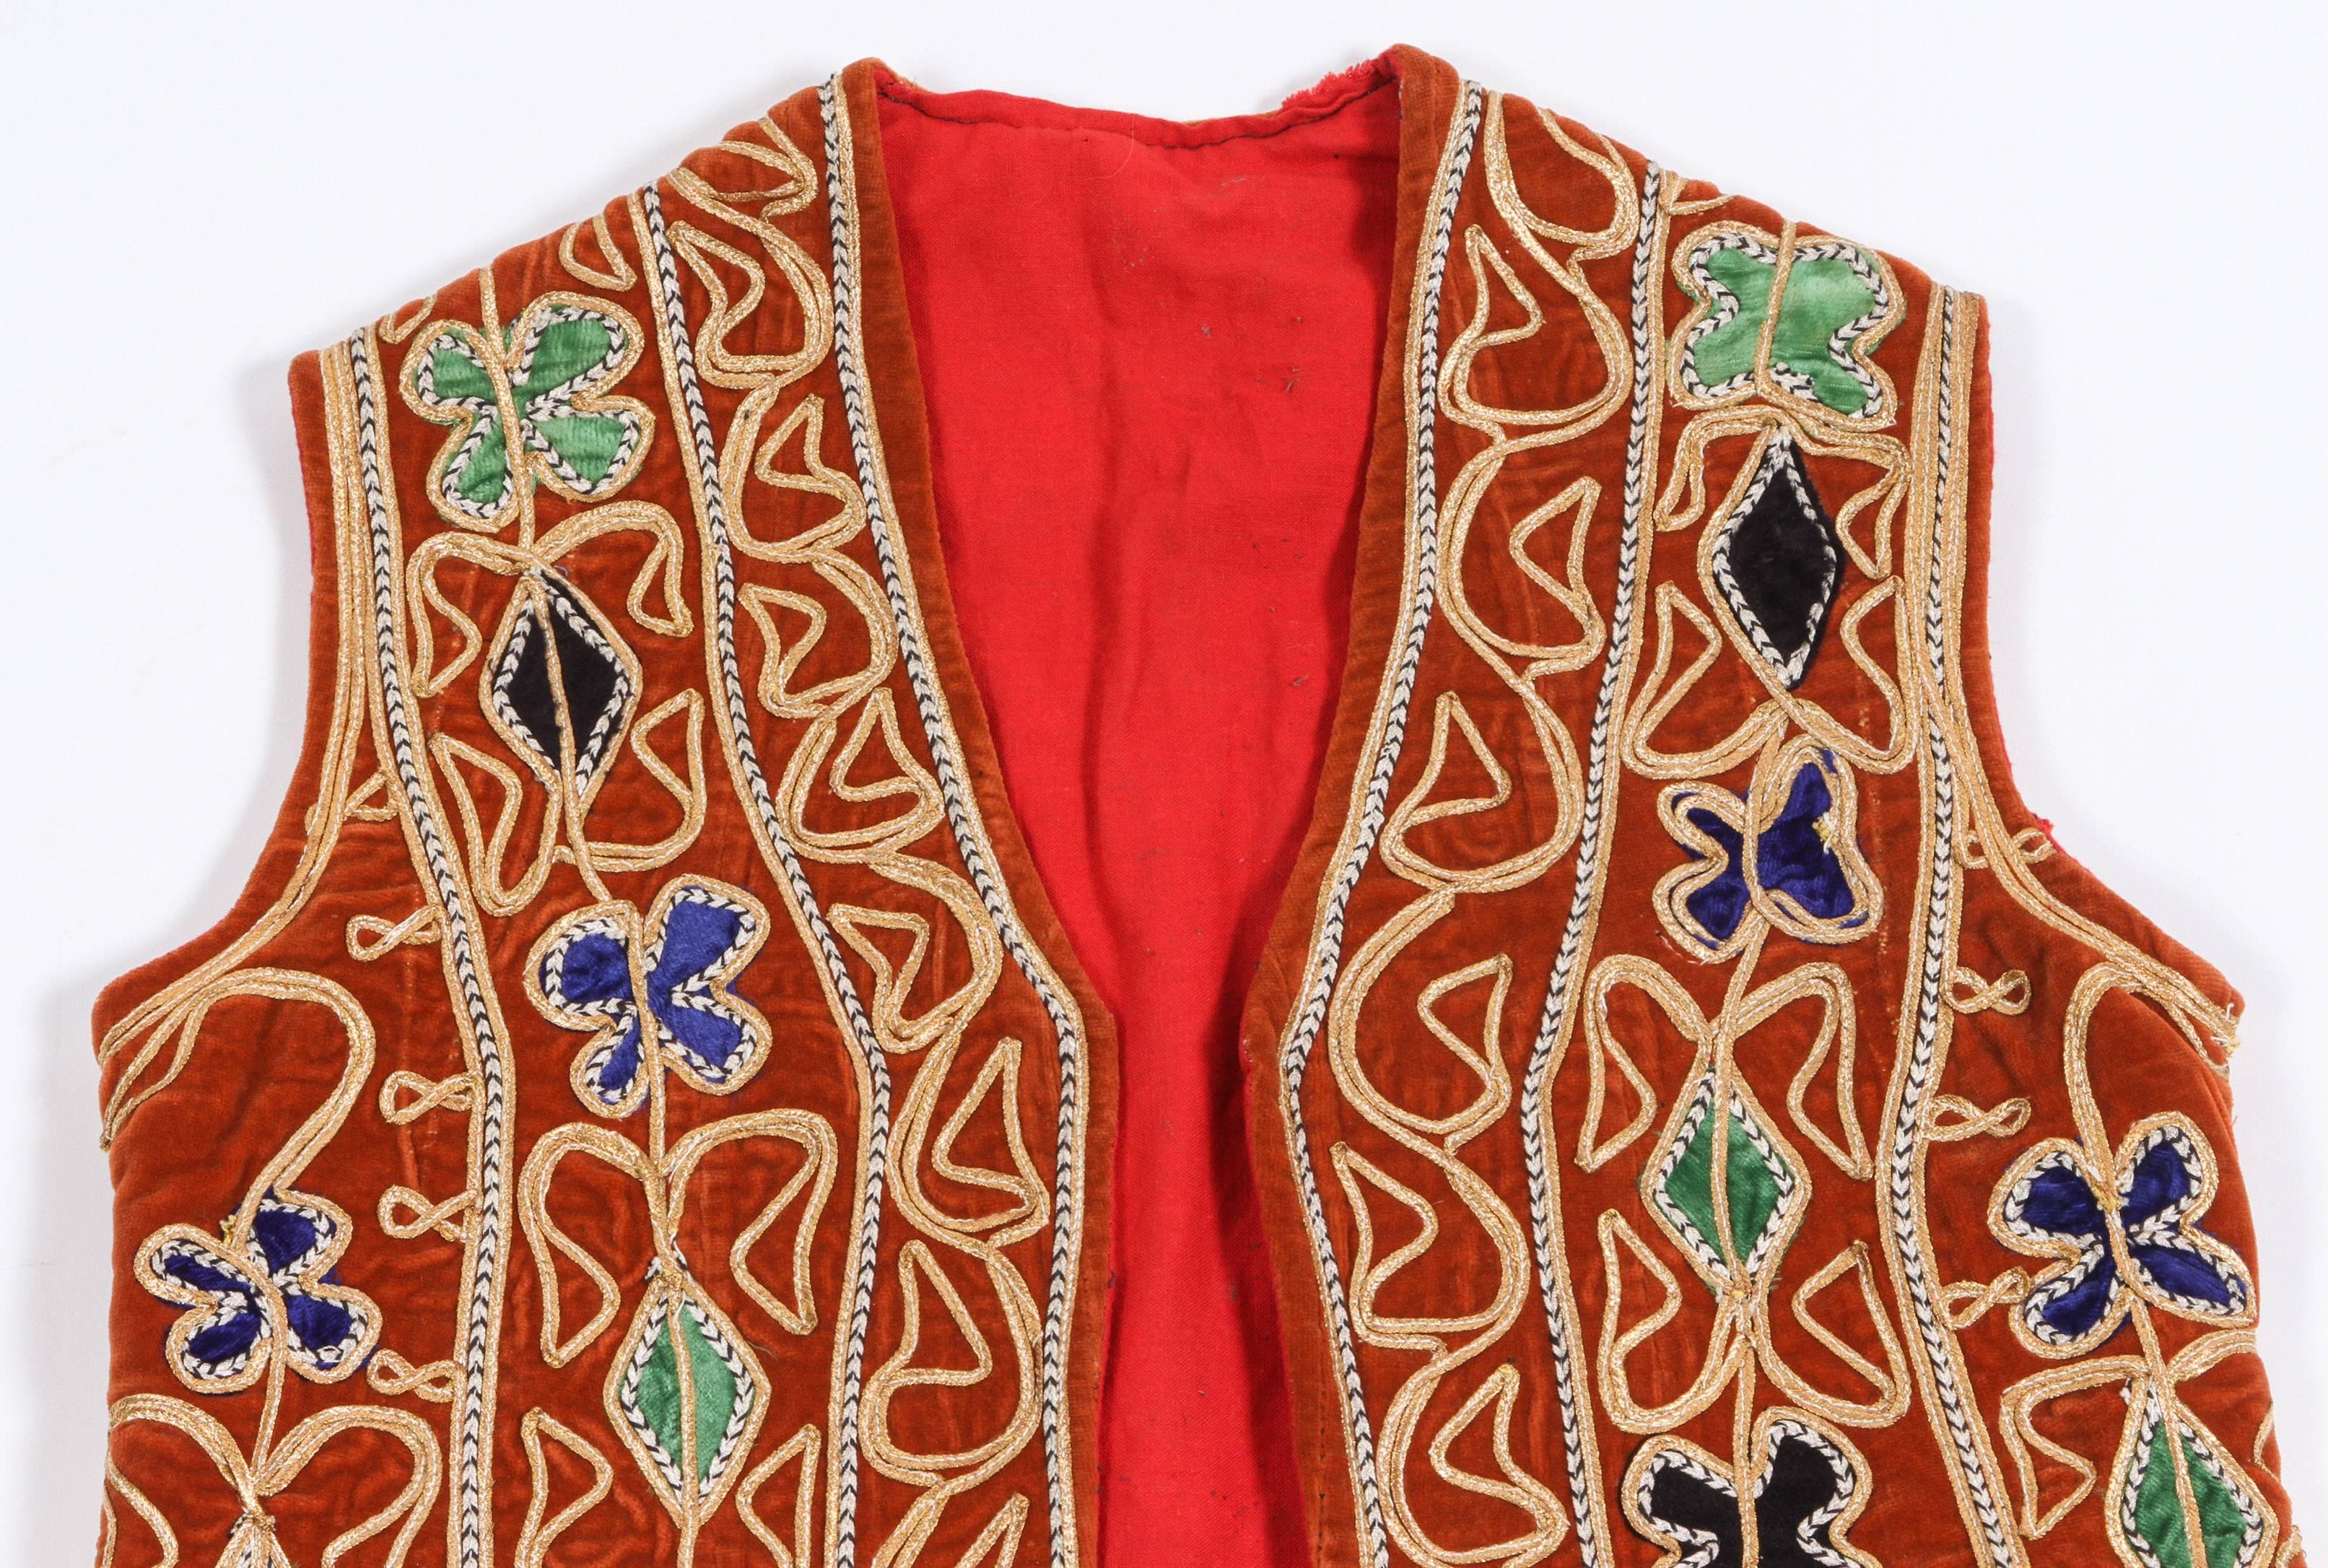 Turkish brightly colored design of geometric patterns against a red ground. Turkish folk costume.
The designs on the open jacket are hand embroidered.
Measures: 29 in, height
18 in. underarm
22in.  wide bottom.